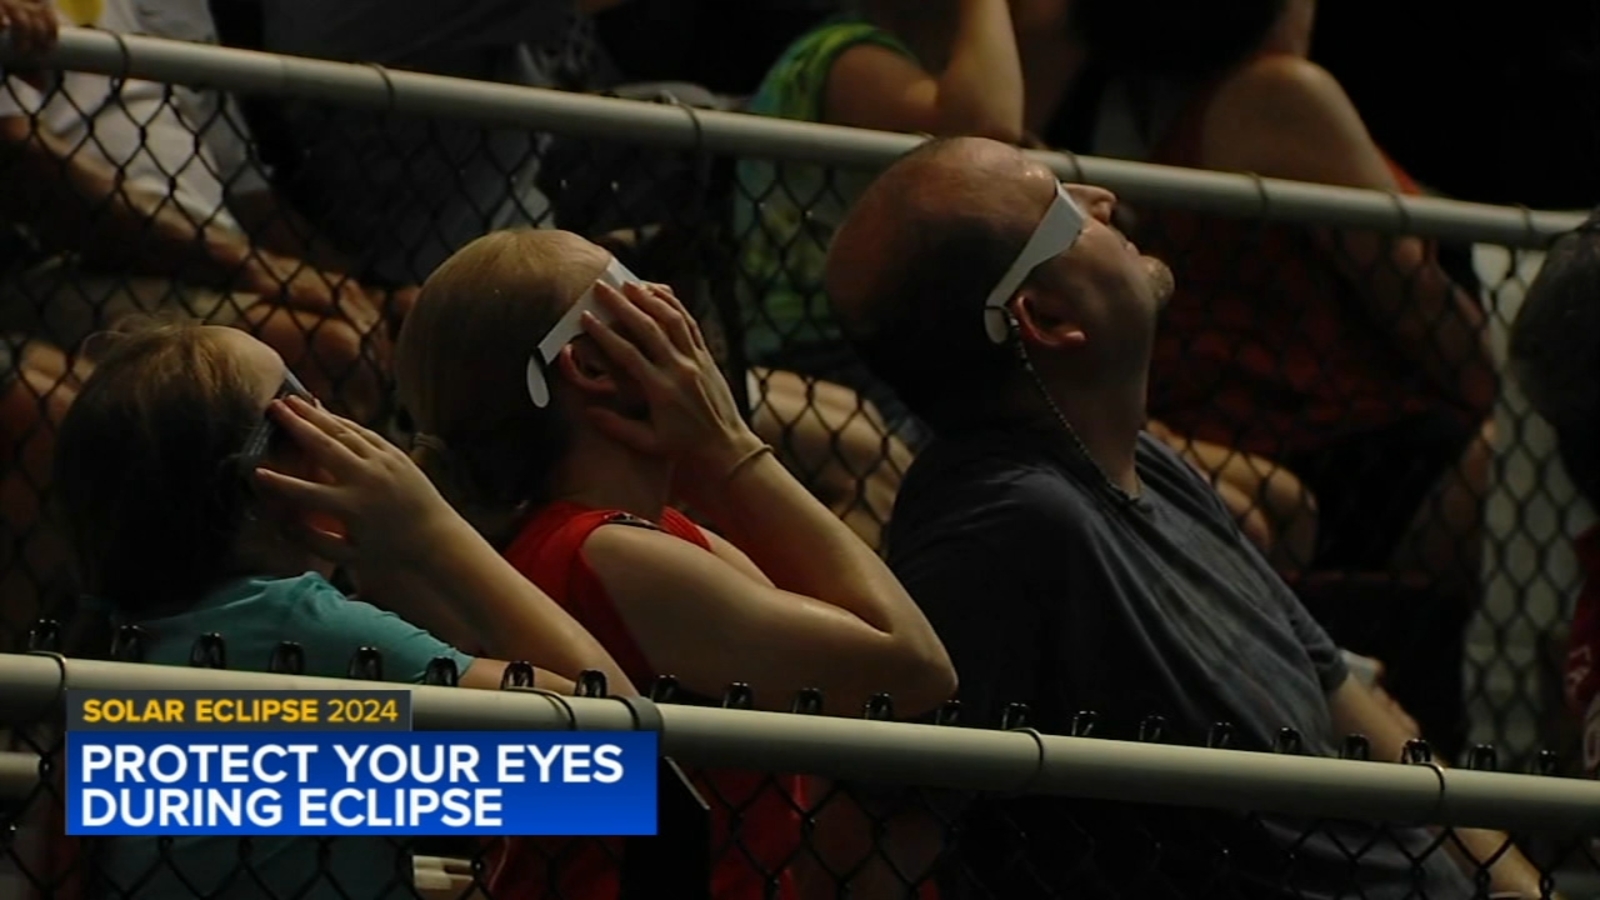 Solar eclipse glasses: How to protect your eyes, vision when during the 2024 solar eclipse on April 8 in Chicago, Illinois [Video]